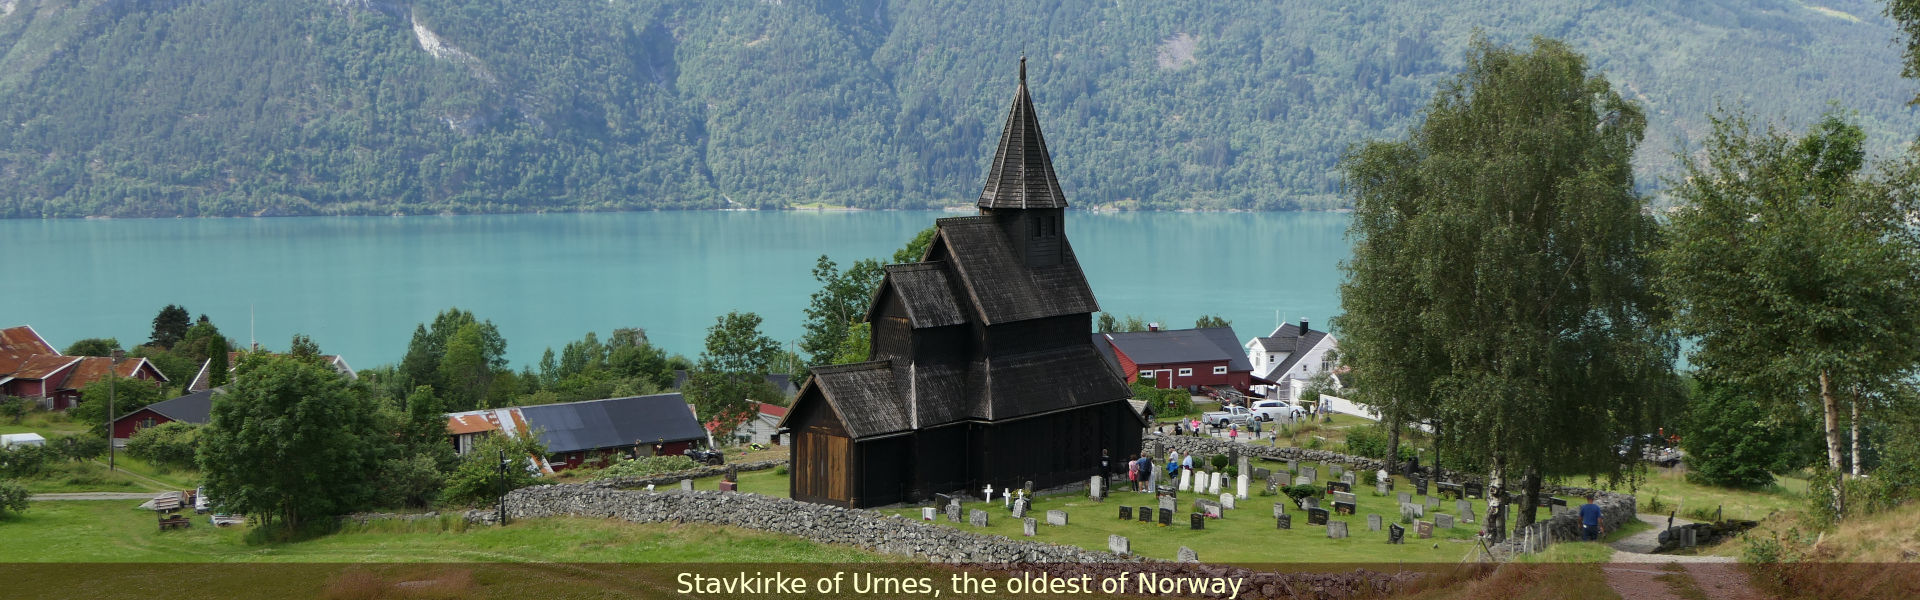 Stavkirke of Urnes, the oldest of the country, Norway